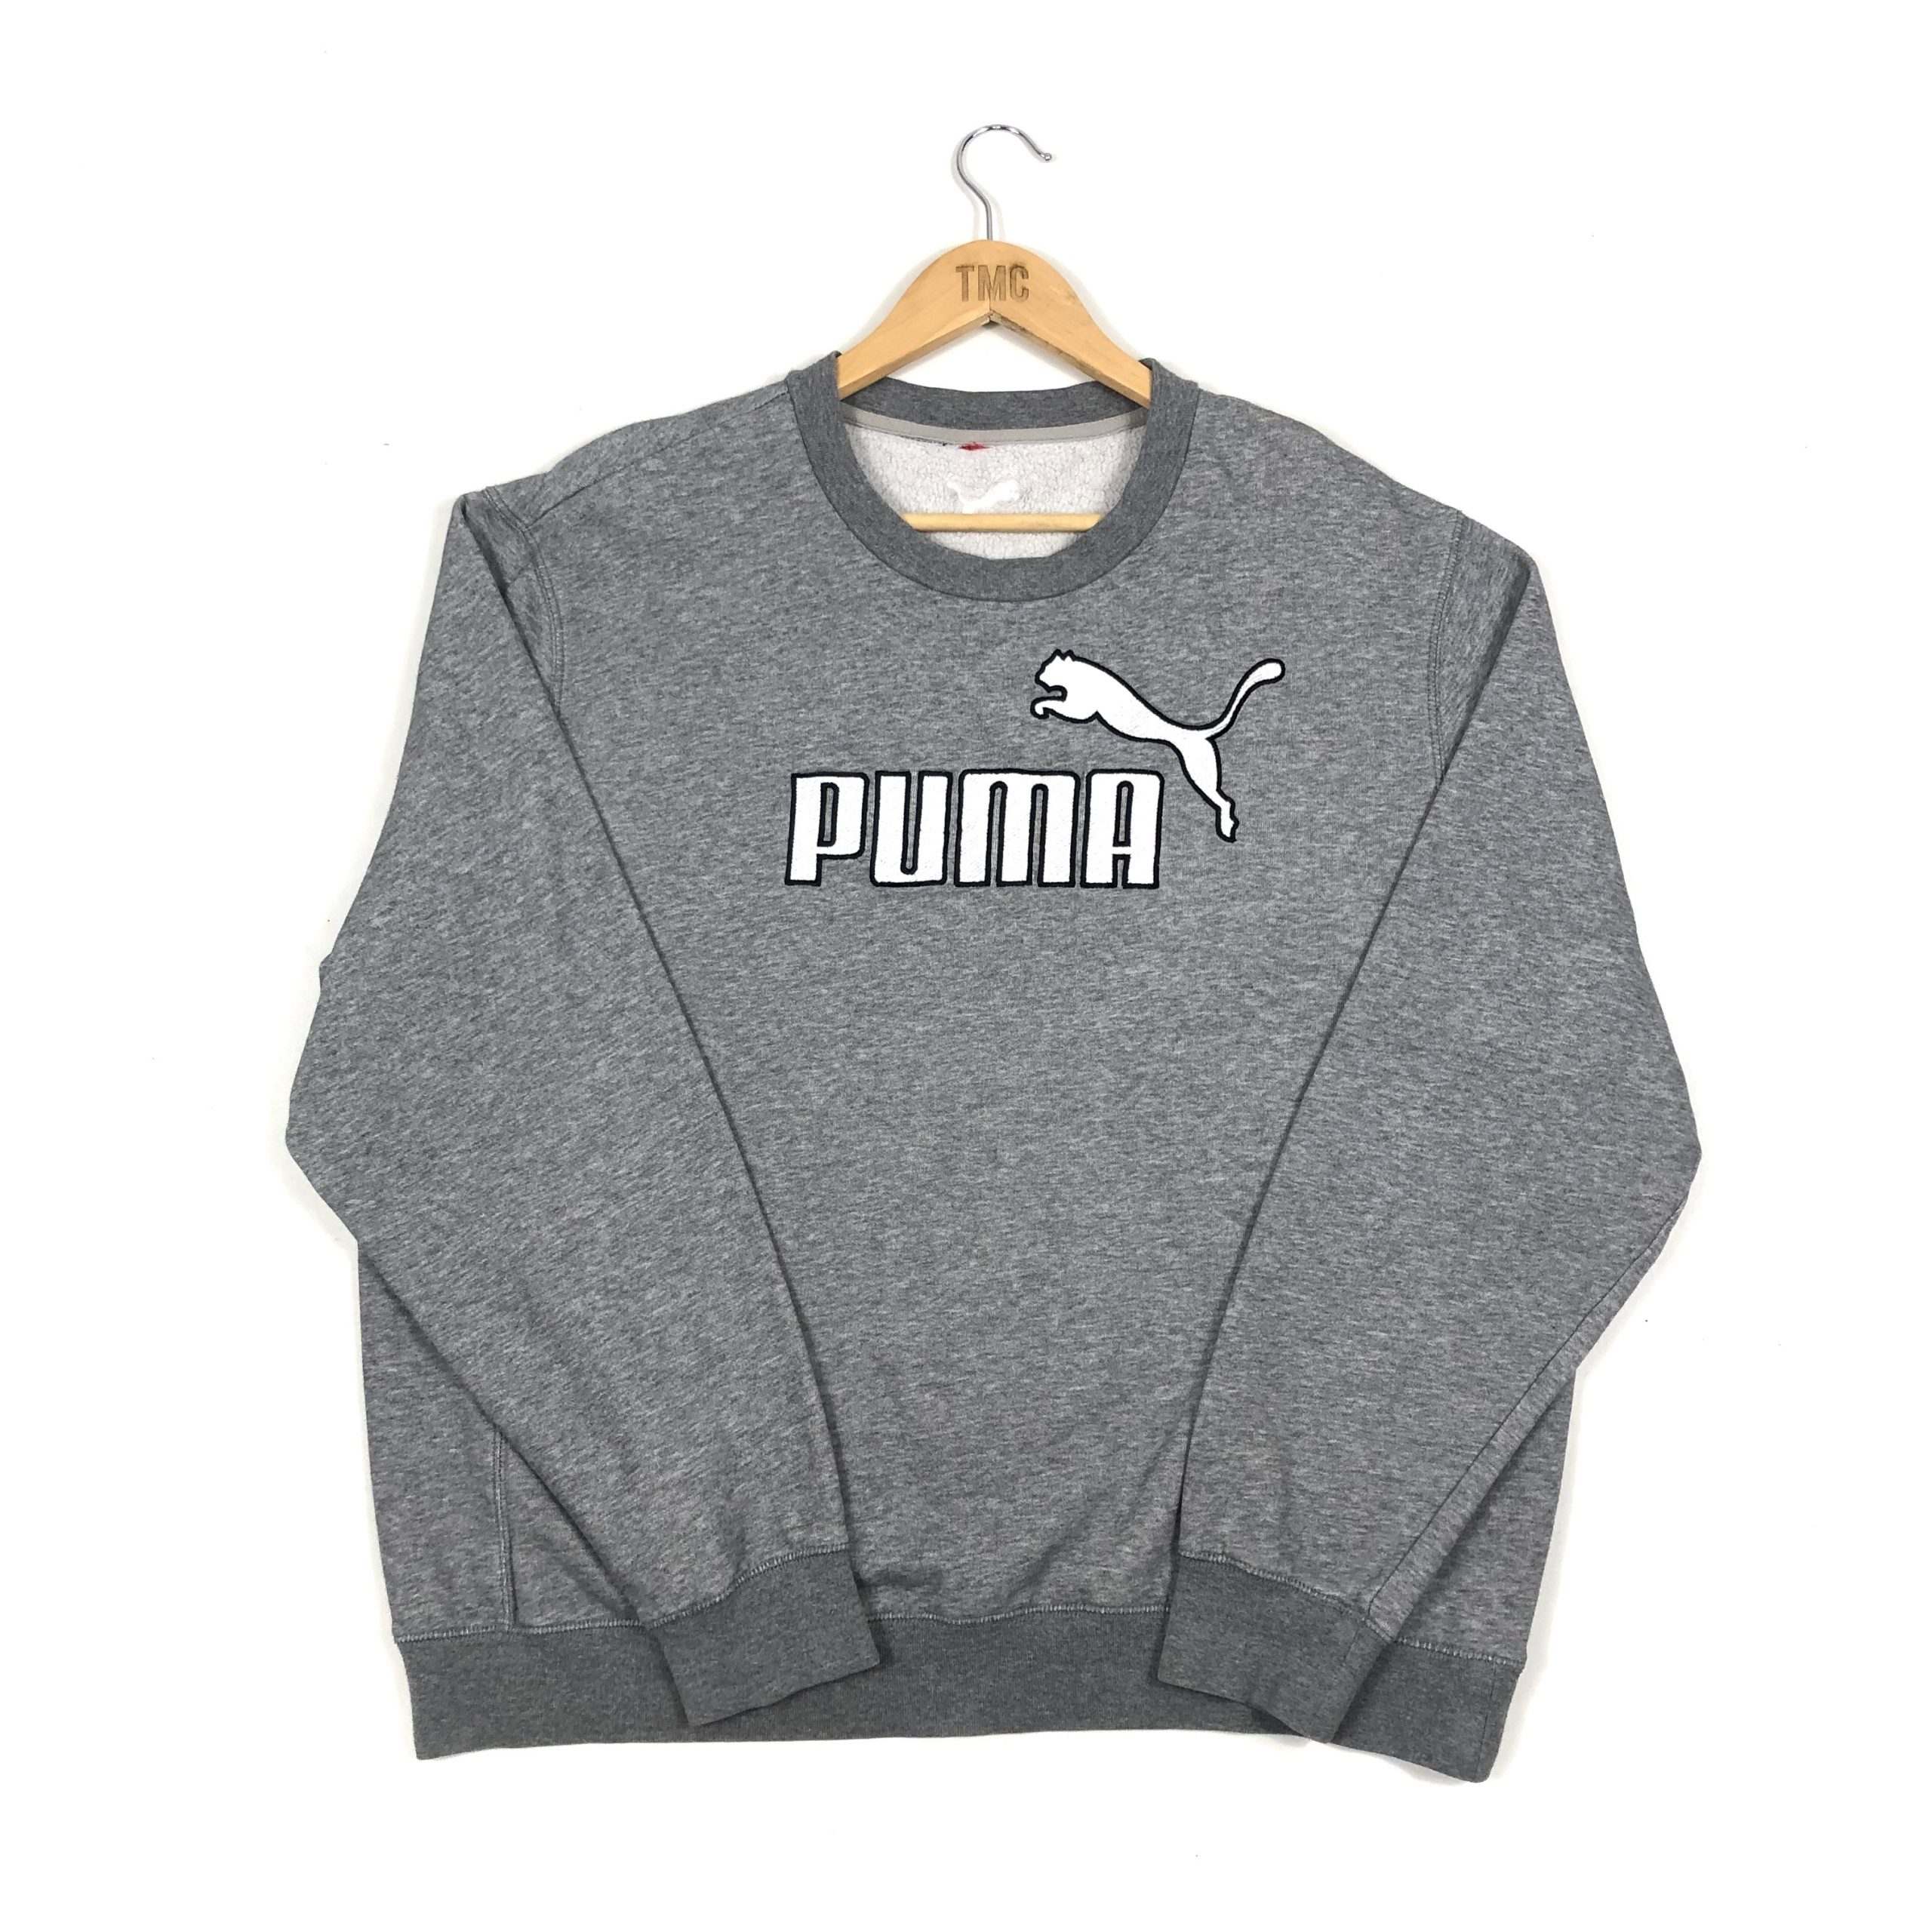 Puma Embroidered Spell Out Sweatshirt - Grey -XL - TMC Vintage ...